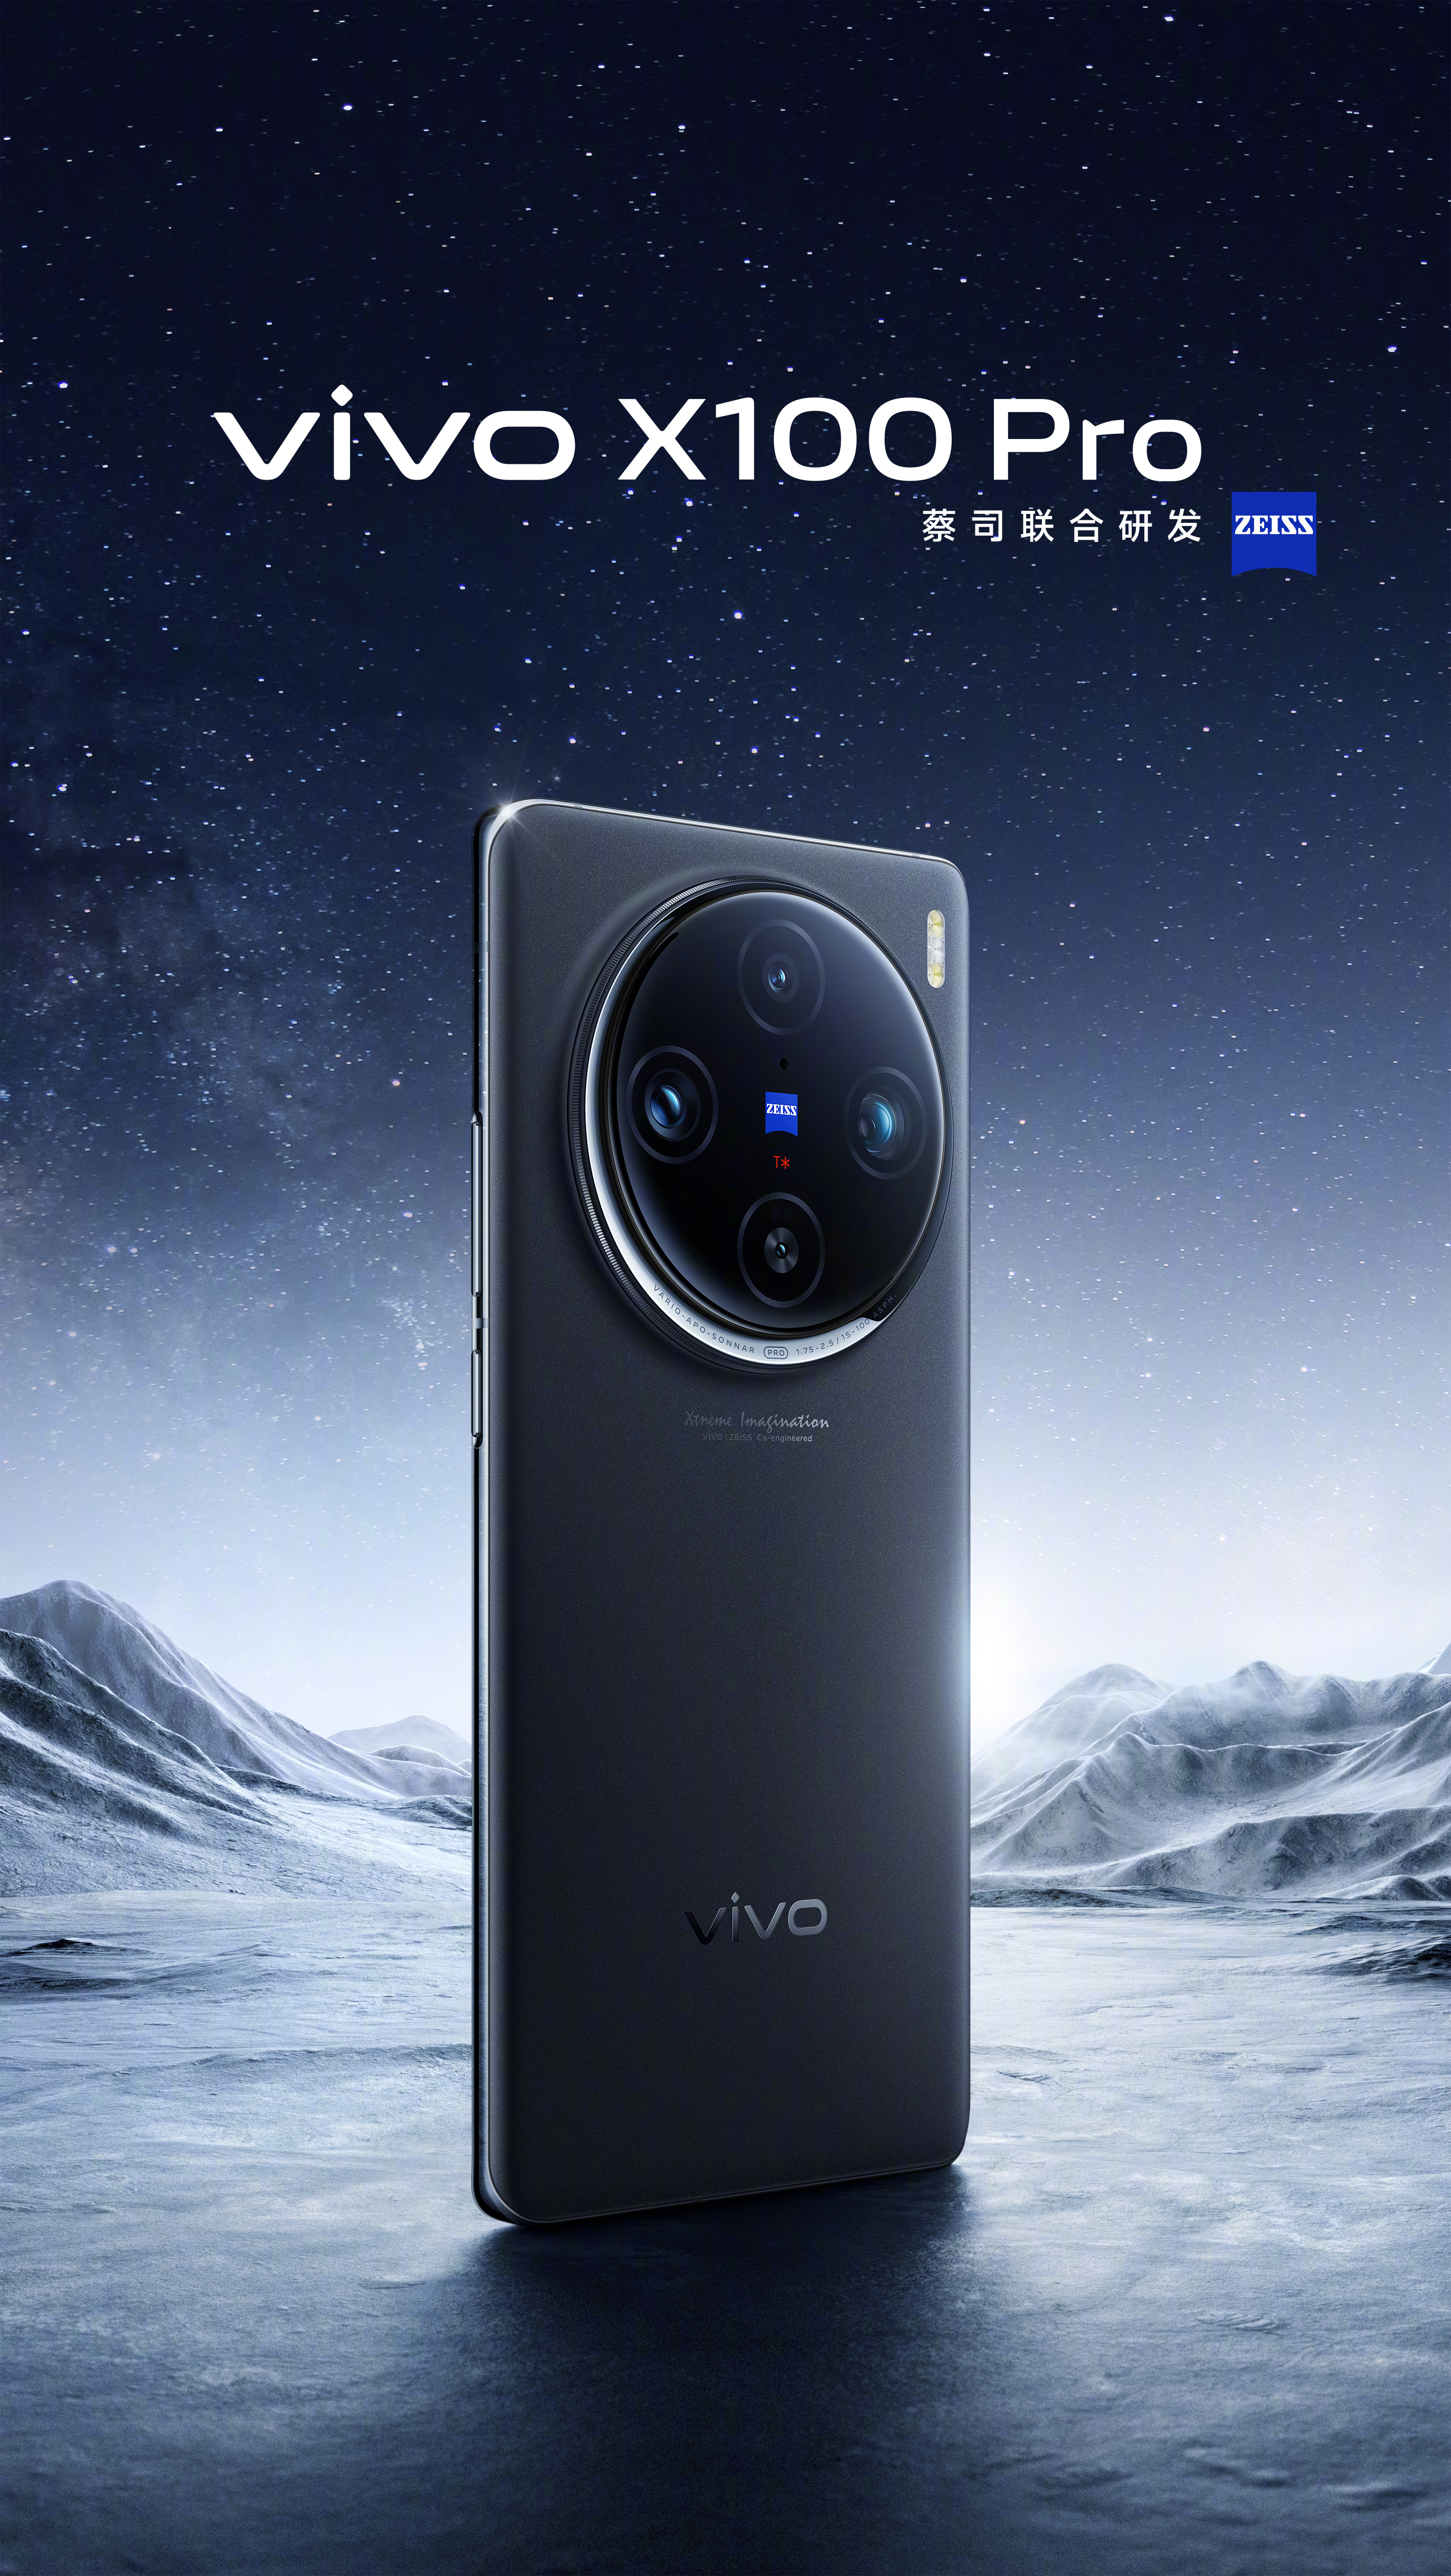 vivo showed new renders of the vivo X100 Pro flagship: the smartphone will  be equipped with a ZEISS camera and will come in four colors